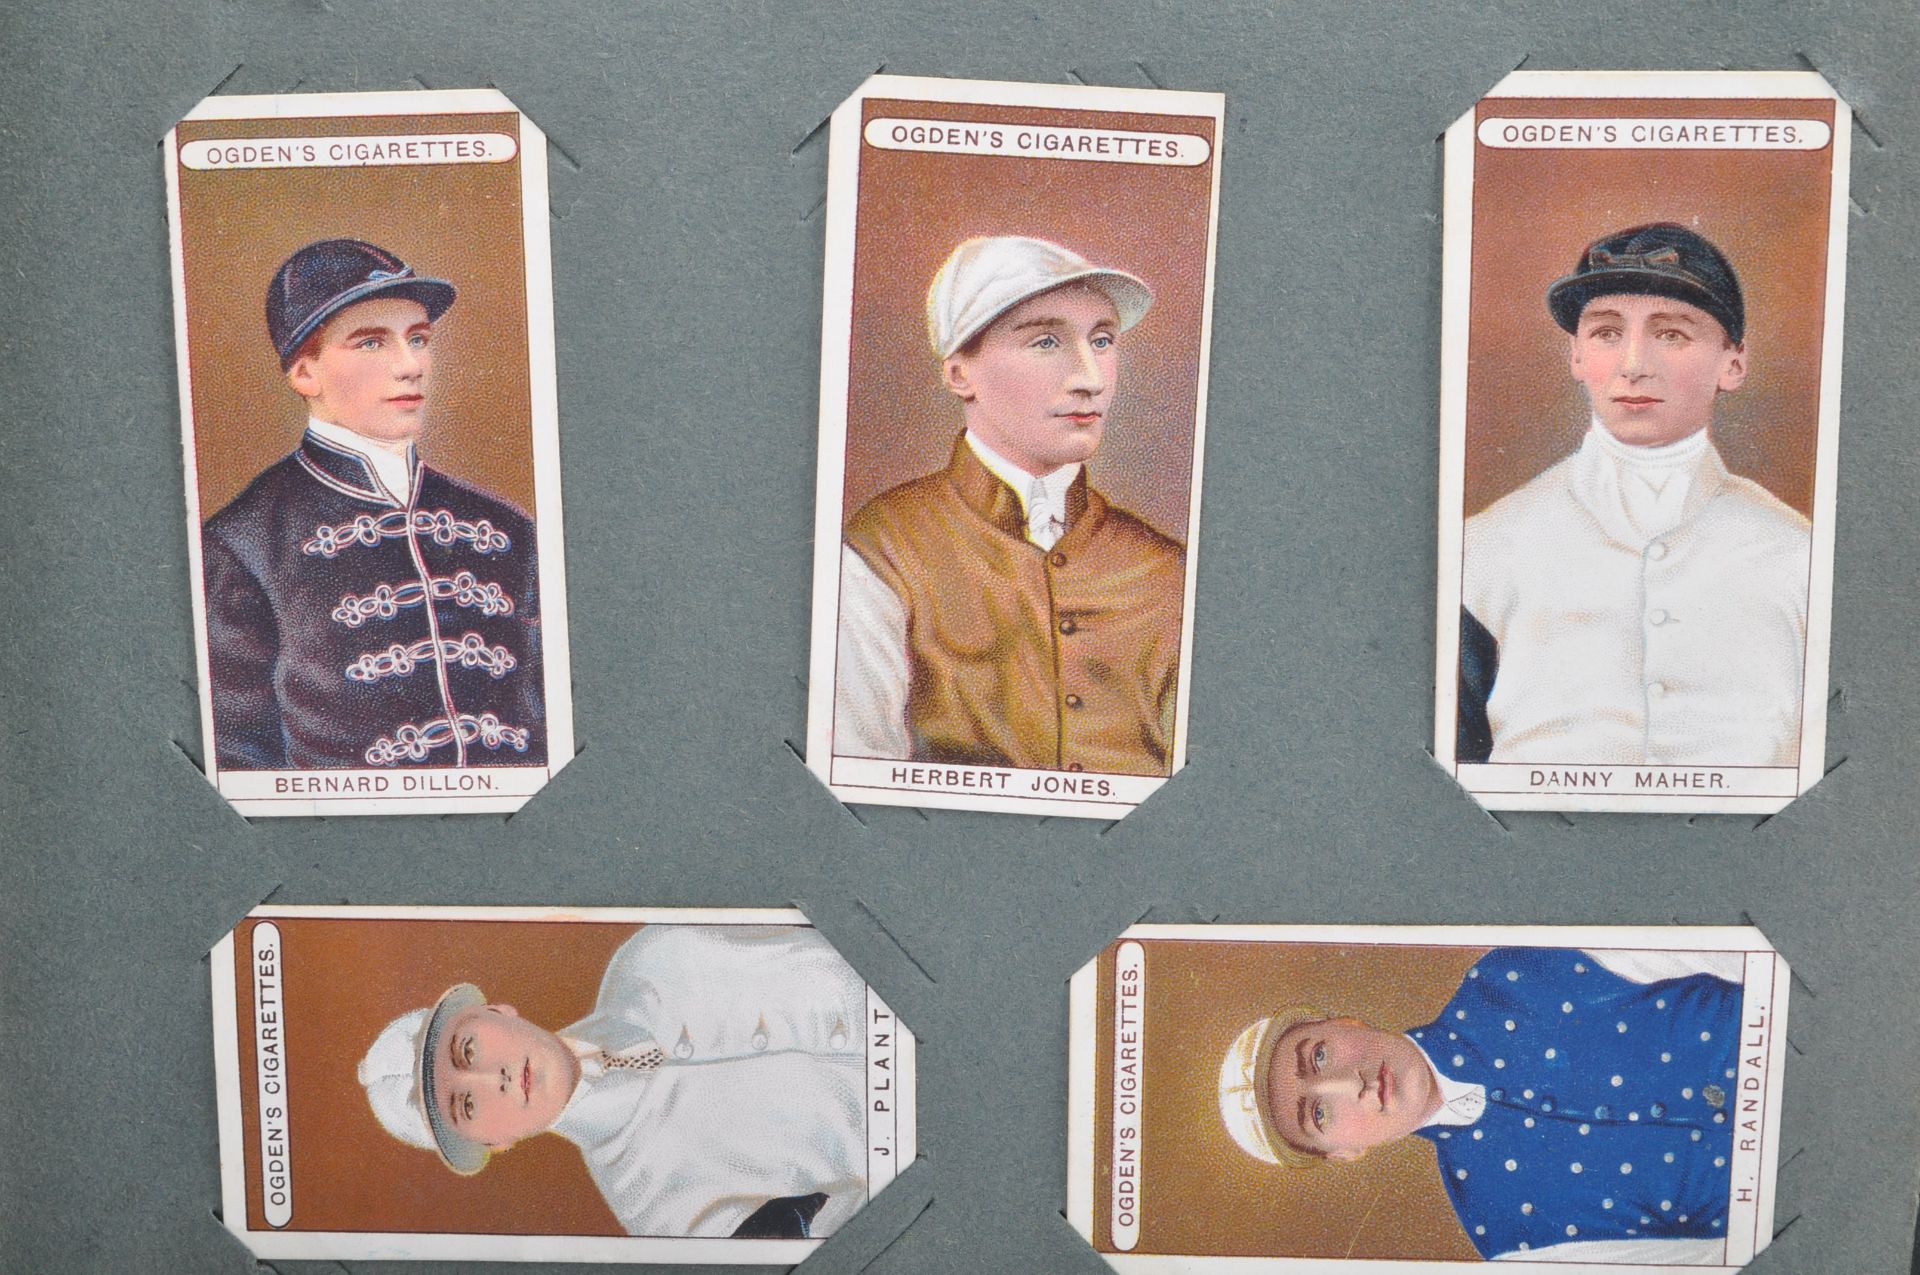 ALBUM OF CIGARETTE CARDS - OGDEN'S - PLAYERS - WILLS - Image 3 of 5